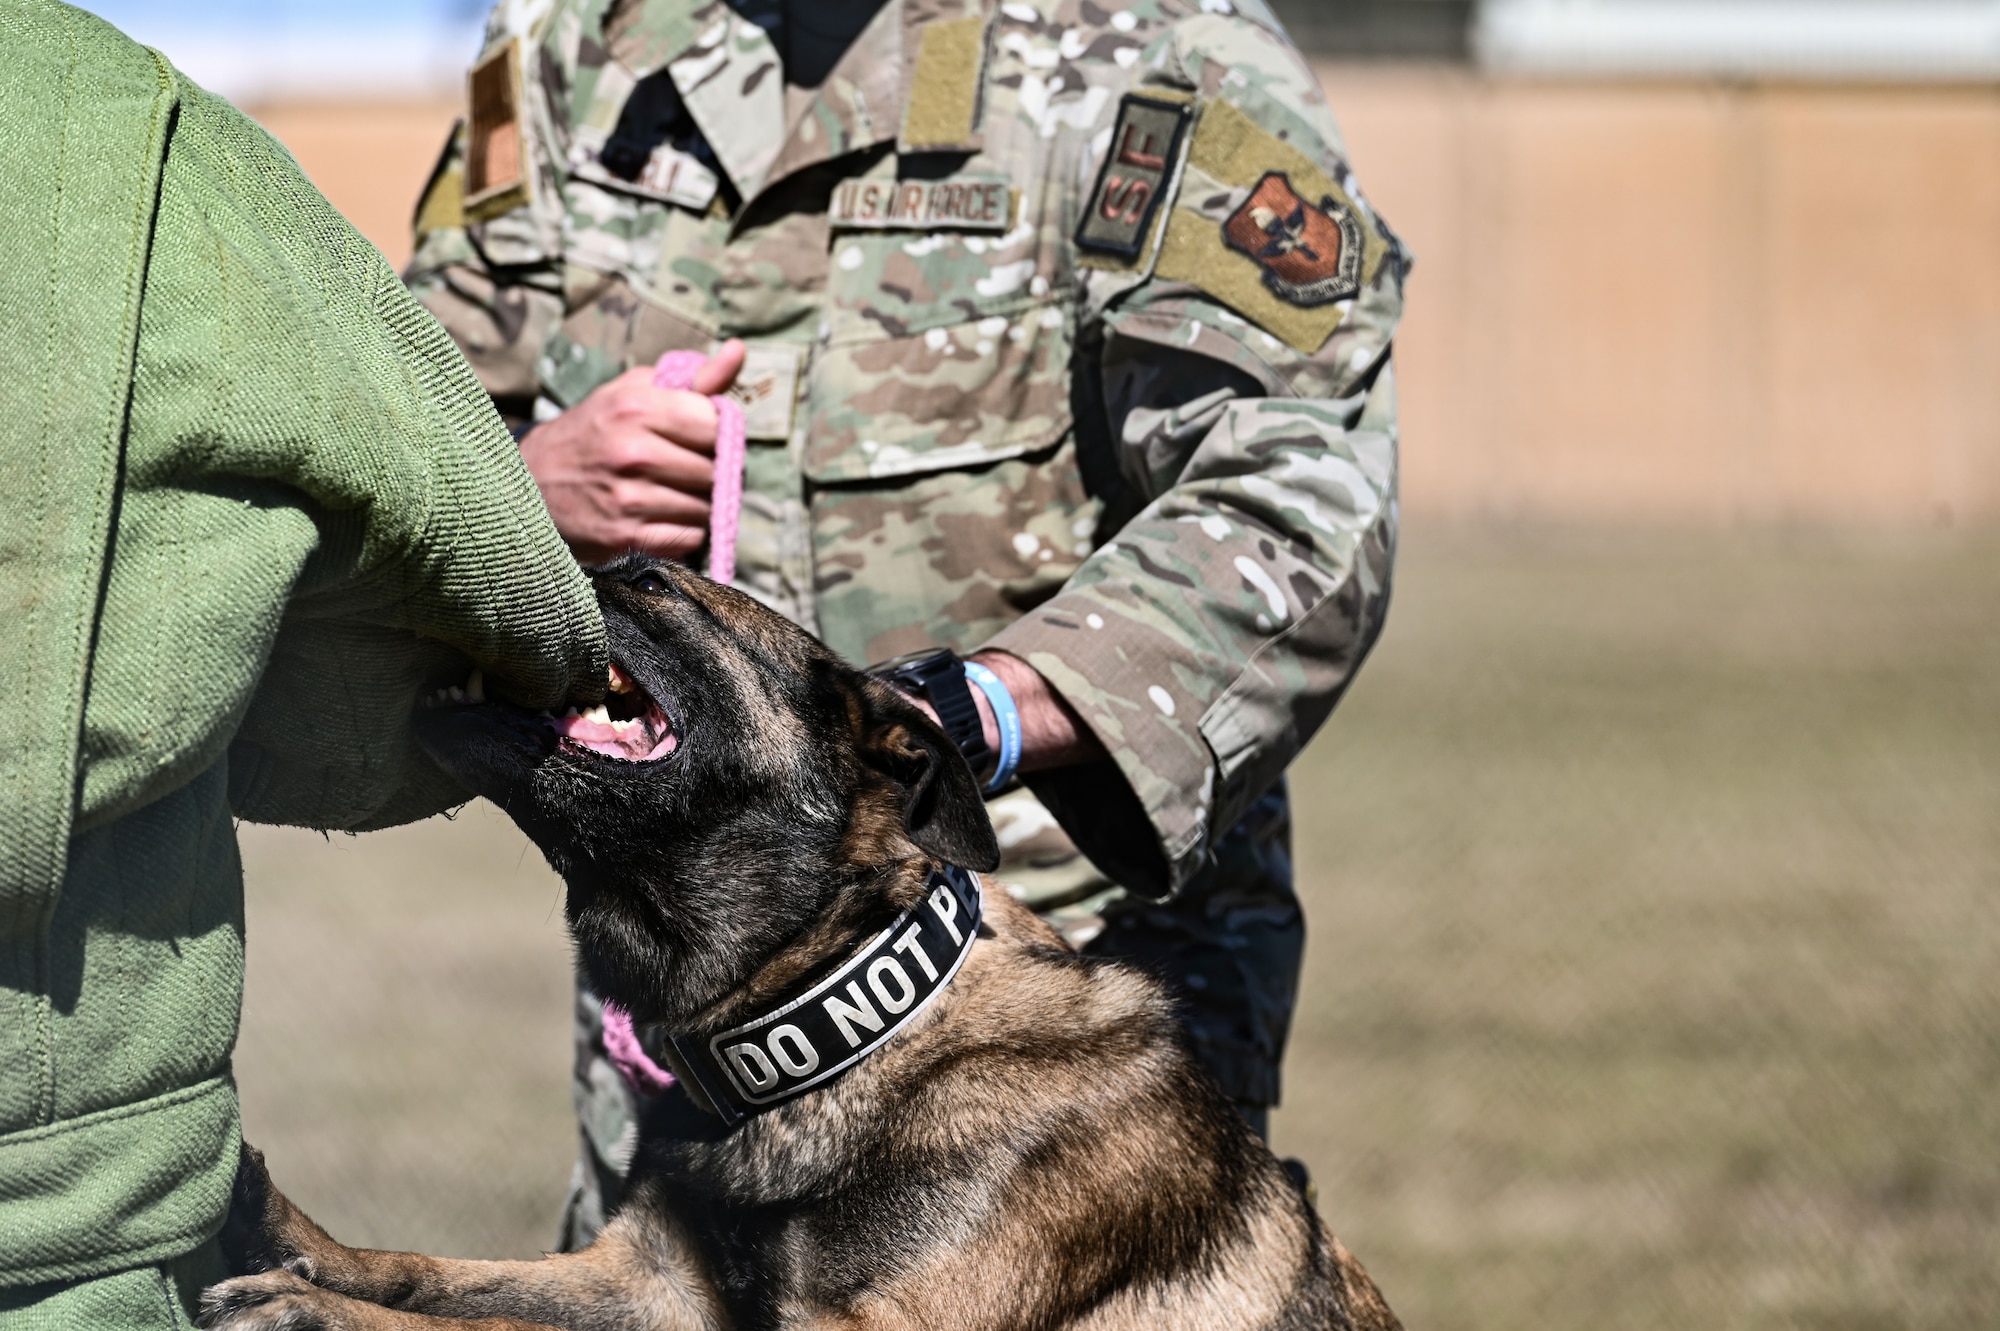 A 14th SFS Airman attempts to break free from the hold of K-9 Dalton during a practice bite at Columbus Air Force Base, MS, Oct. 16, 2023. The K-9s are instructed to hold onto the perpetrators until police officers can make the arrest. (U.S. Air Force photo by A1C Jessica Blocher)